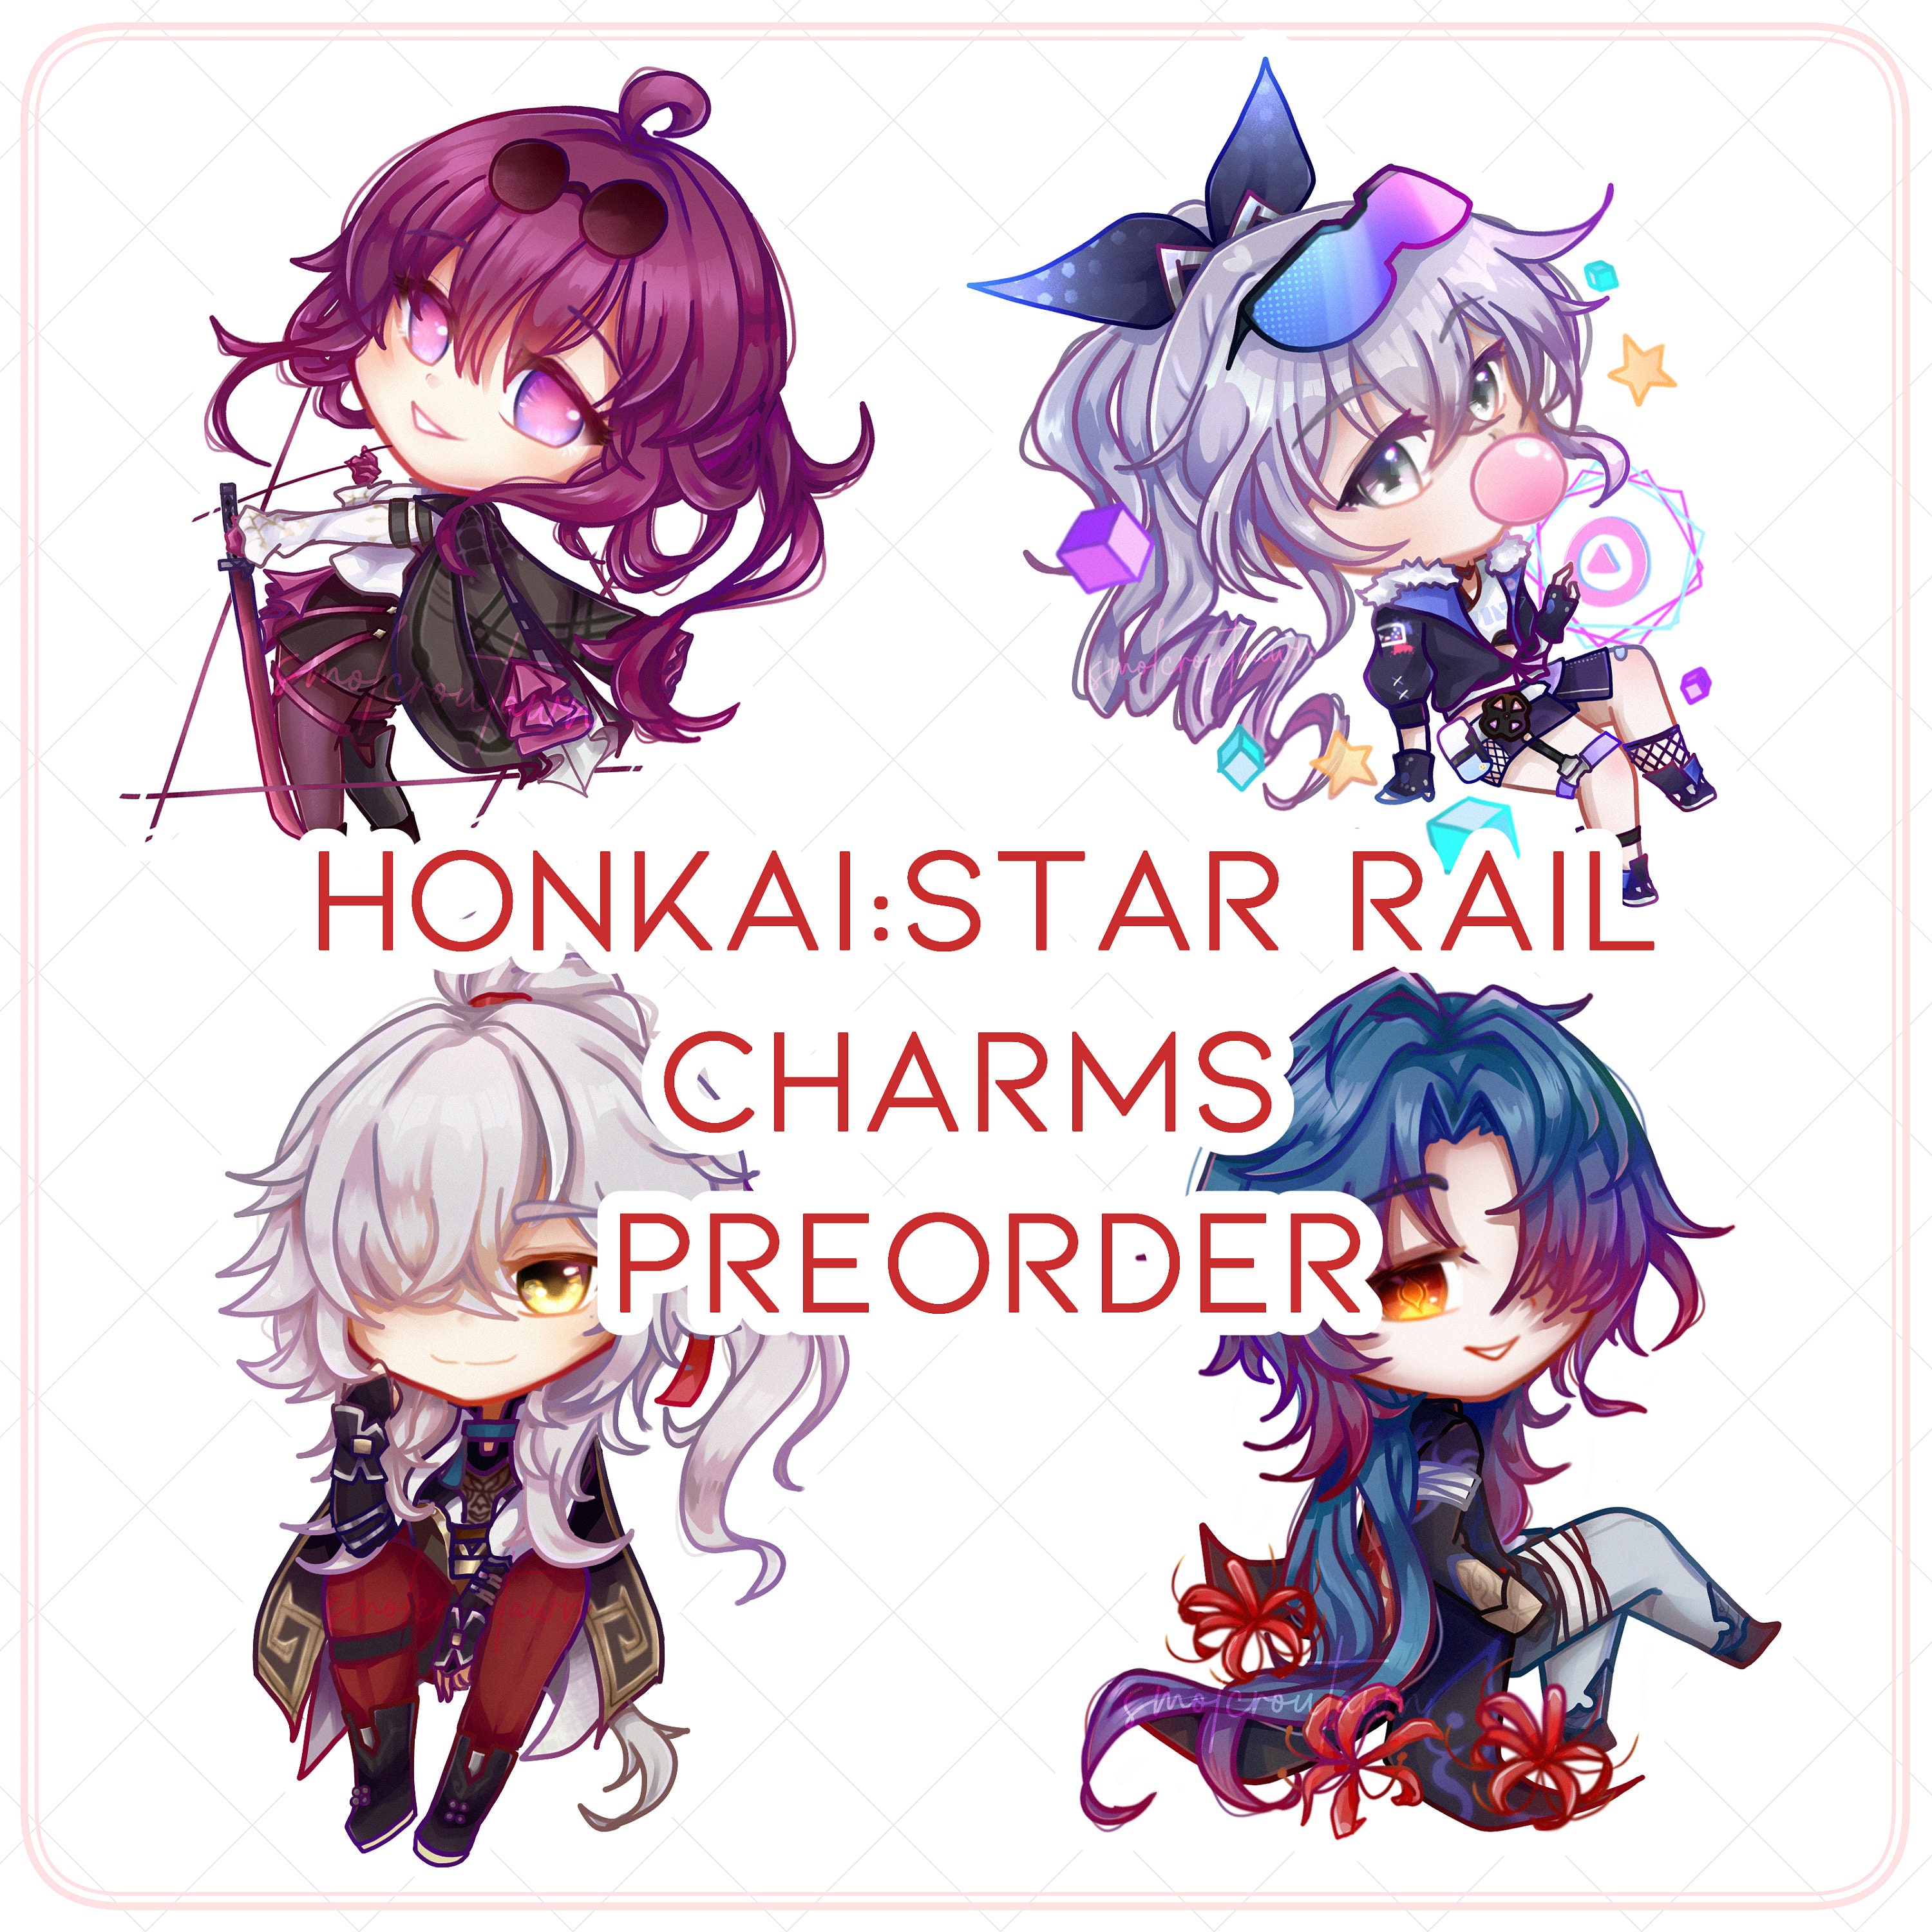 I made this to see which hair color has the most characters in Star Rail :  r/HonkaiStarRail